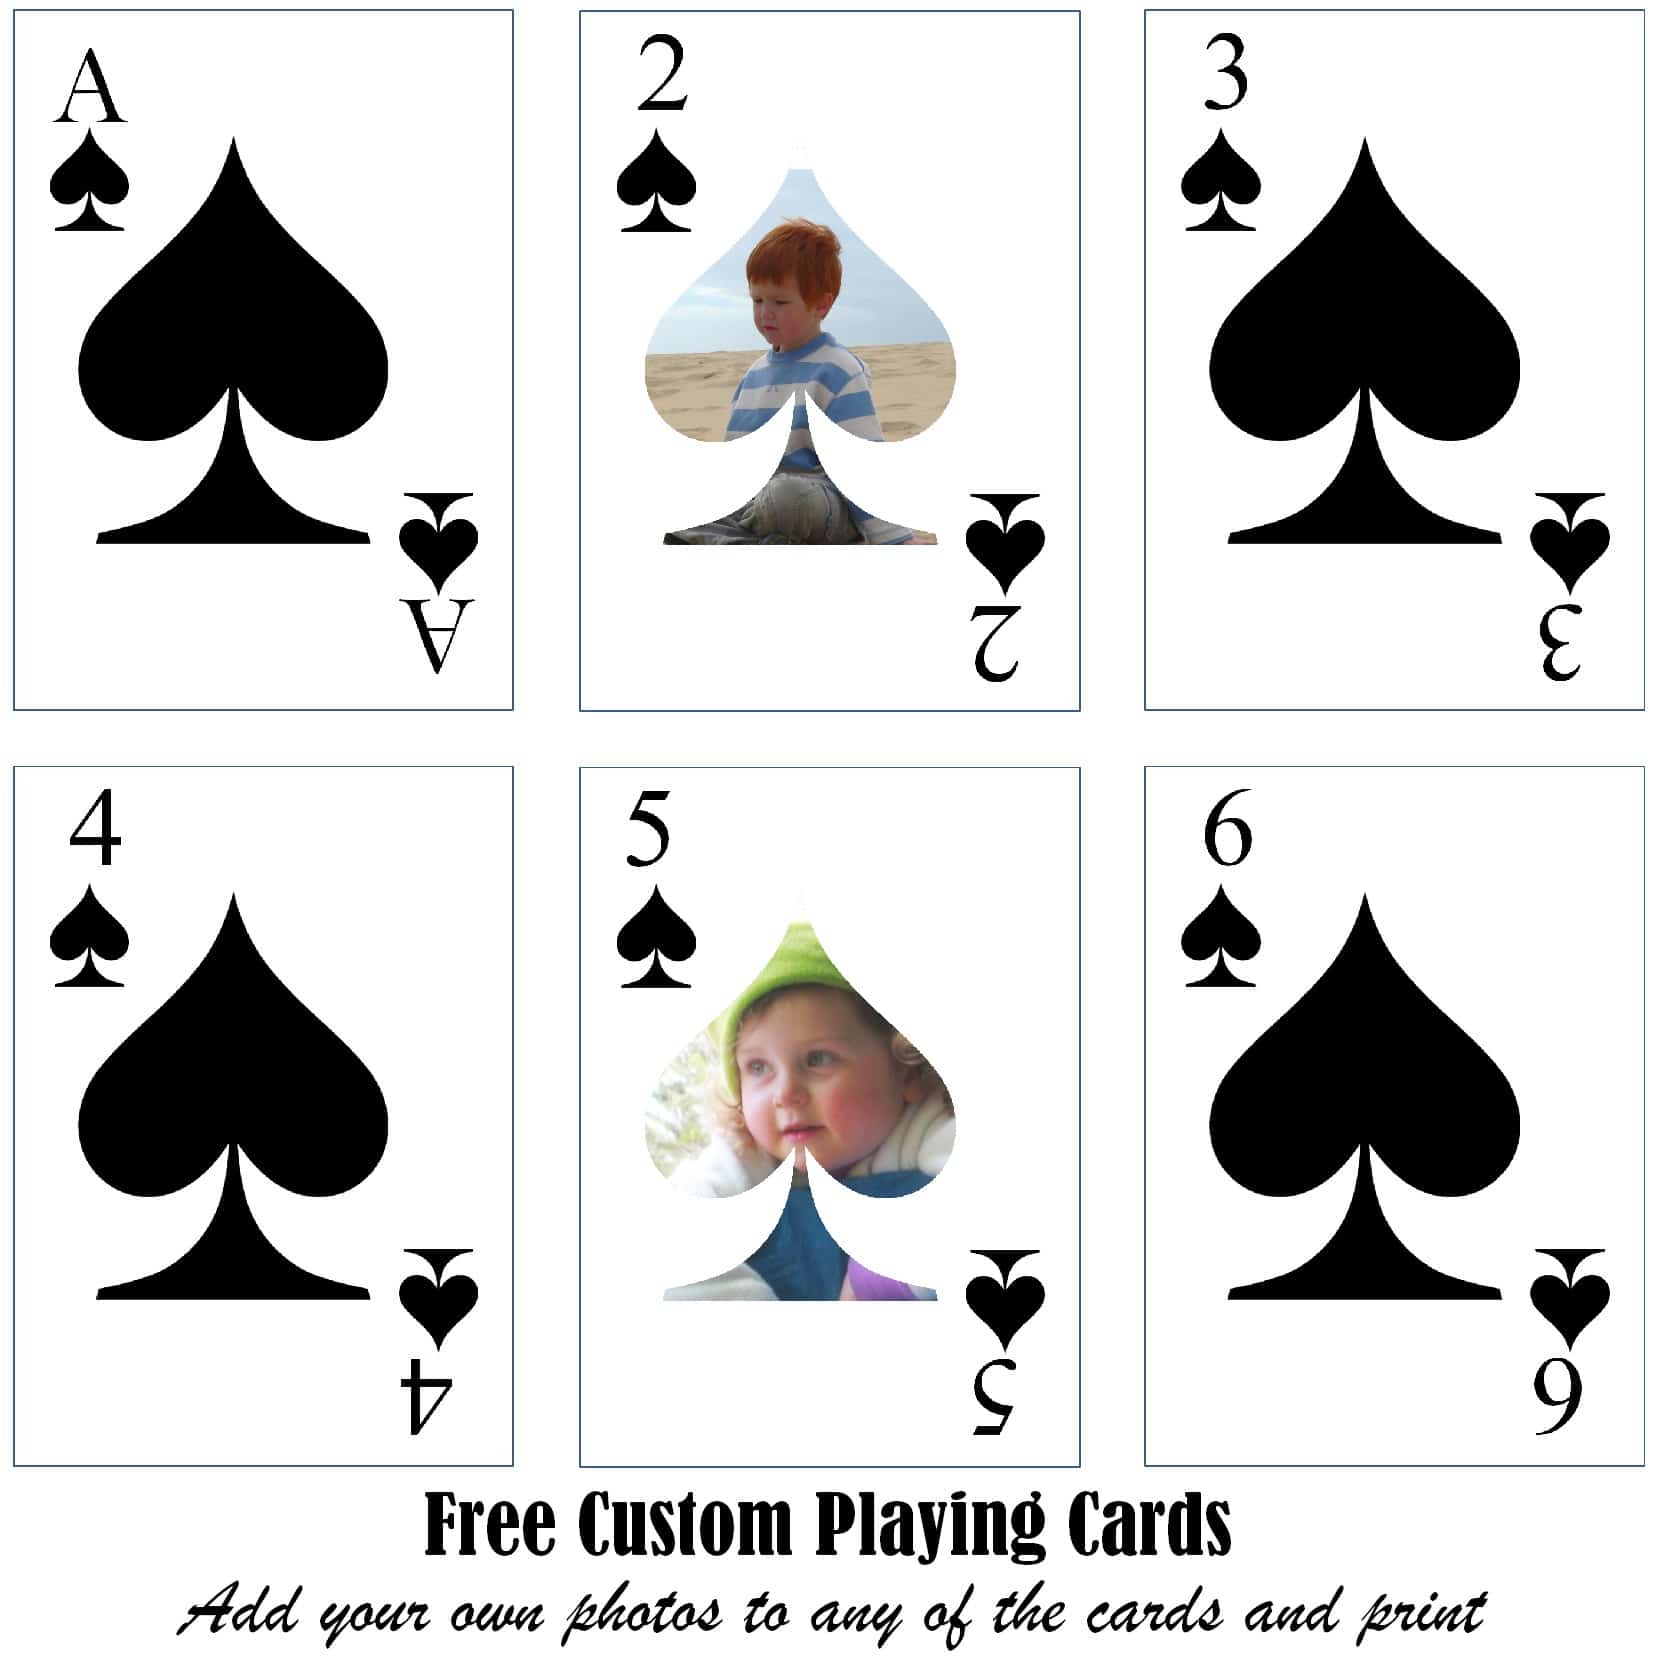 Make Your Own Playing Cards Template from www.rewardcharts4kids.com